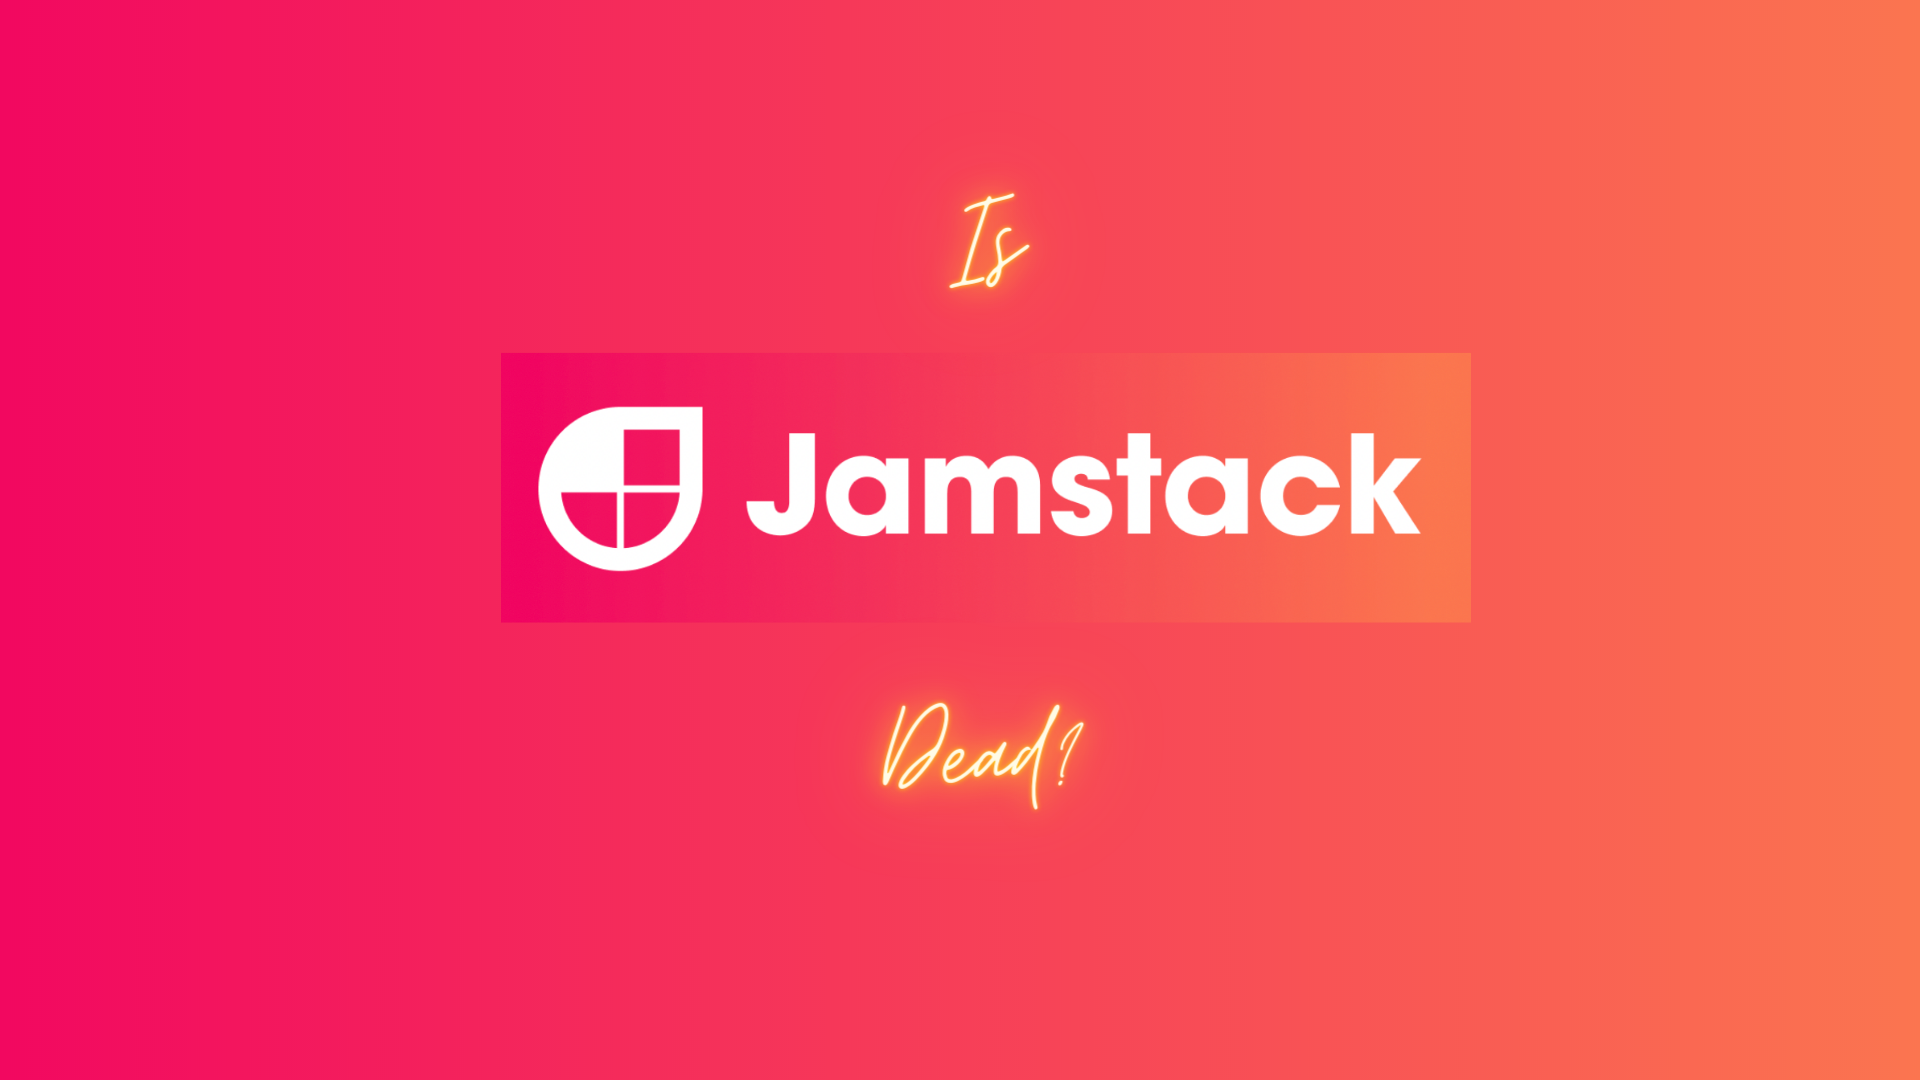 Is Jamstack dead? On a blended red and yellow background.